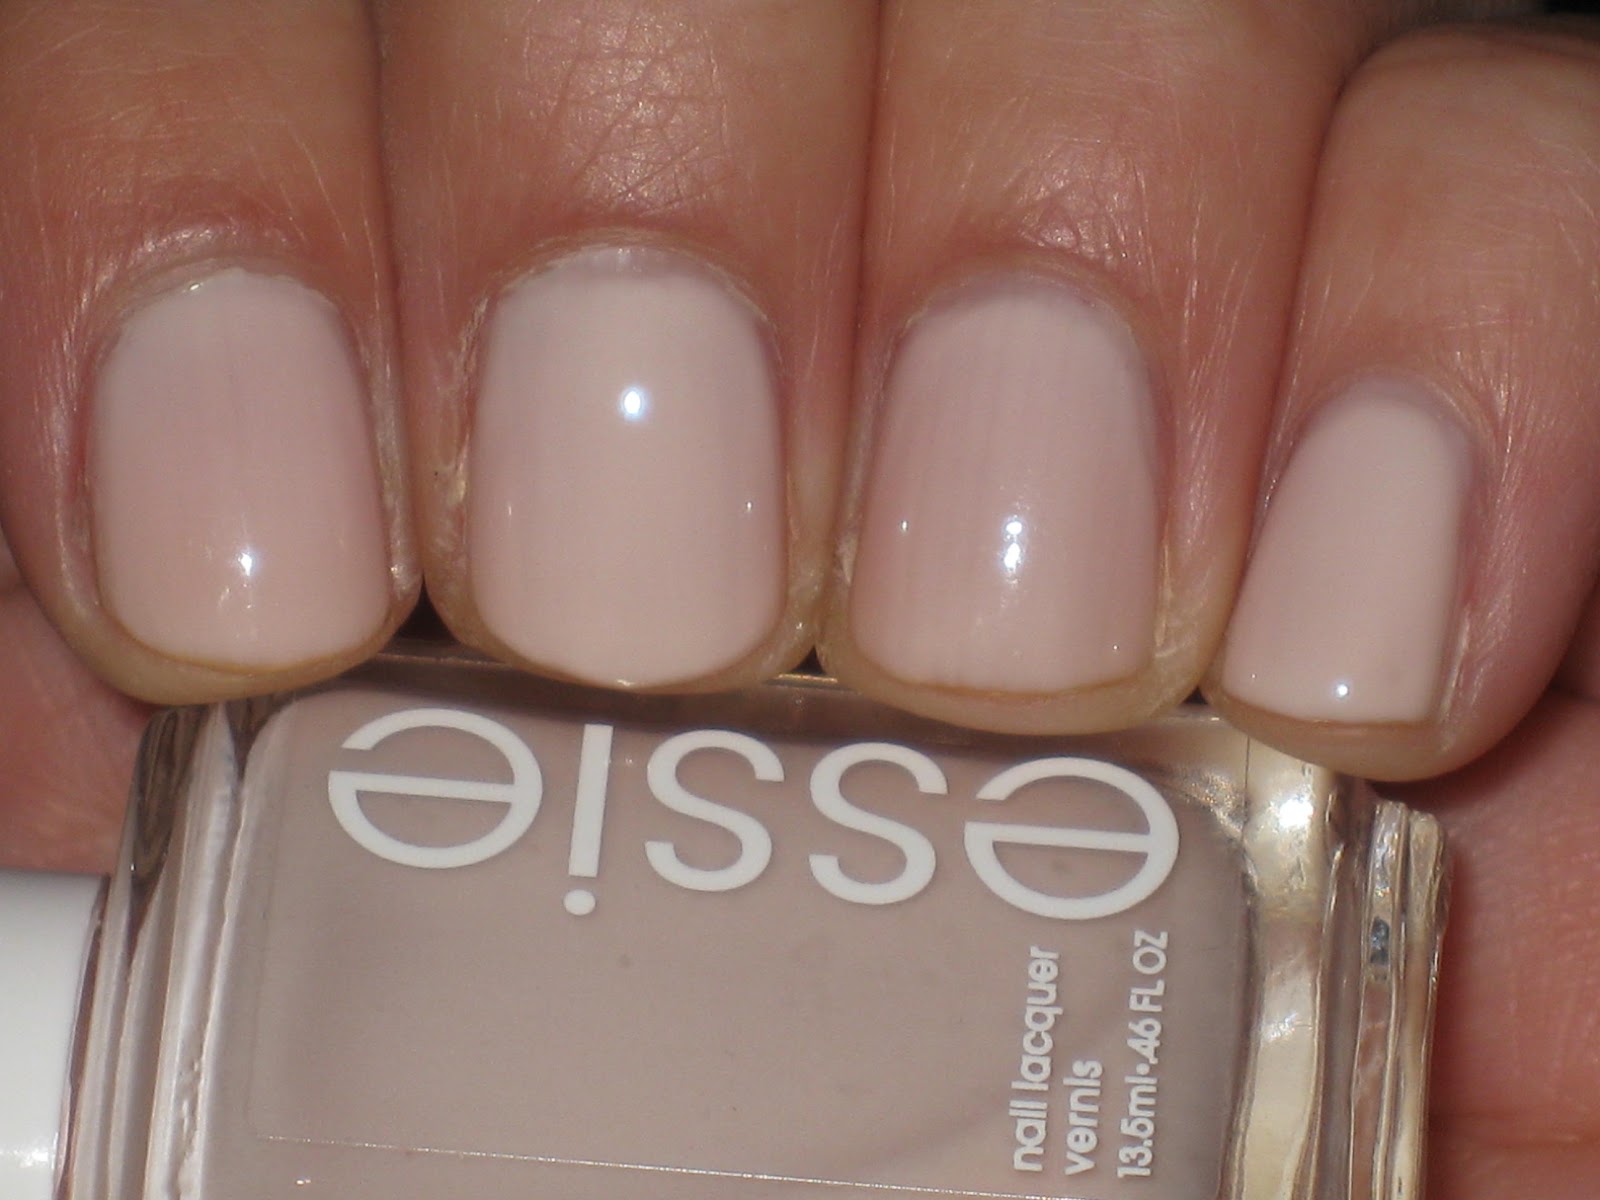 2. Essie Nail Polish in "Ballet Slippers" - wide 3